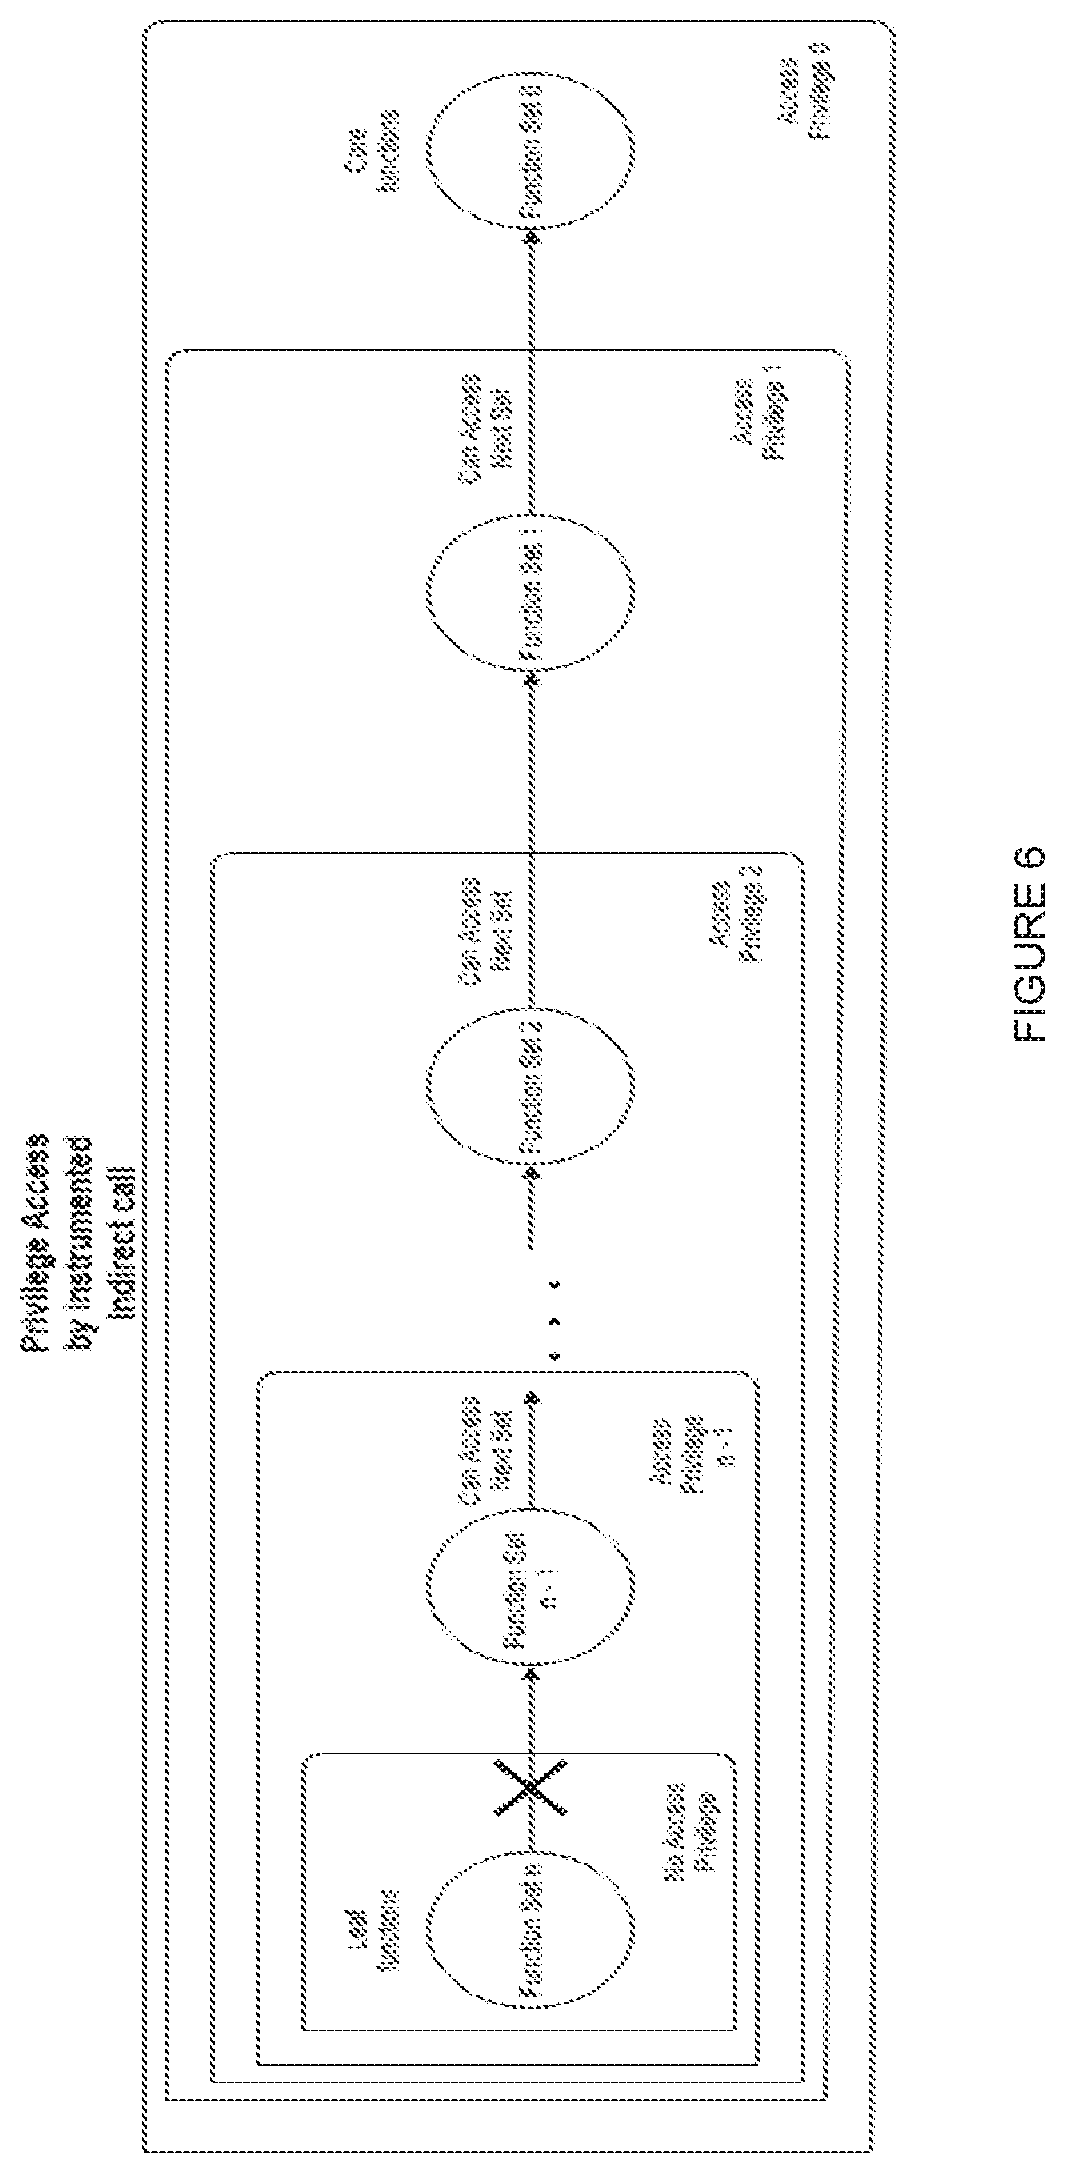 Method of enforcing control flow integrity in a monolithic binary using static analysis